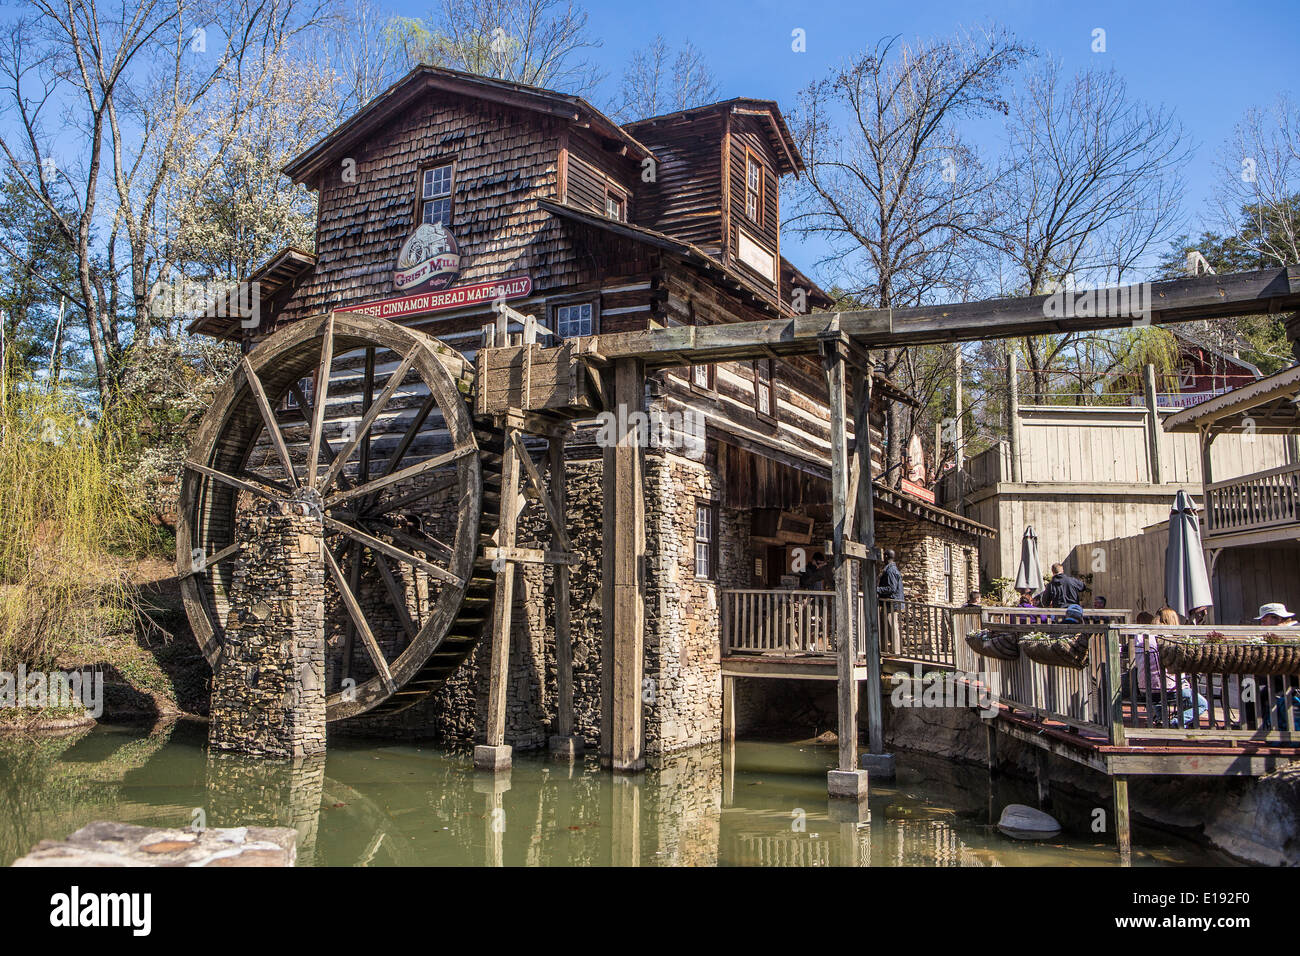 Dollywood Grist Mill ist im Themenpark Dollywood in Pigeon Forge, Tennessee abgebildet. Stockfoto